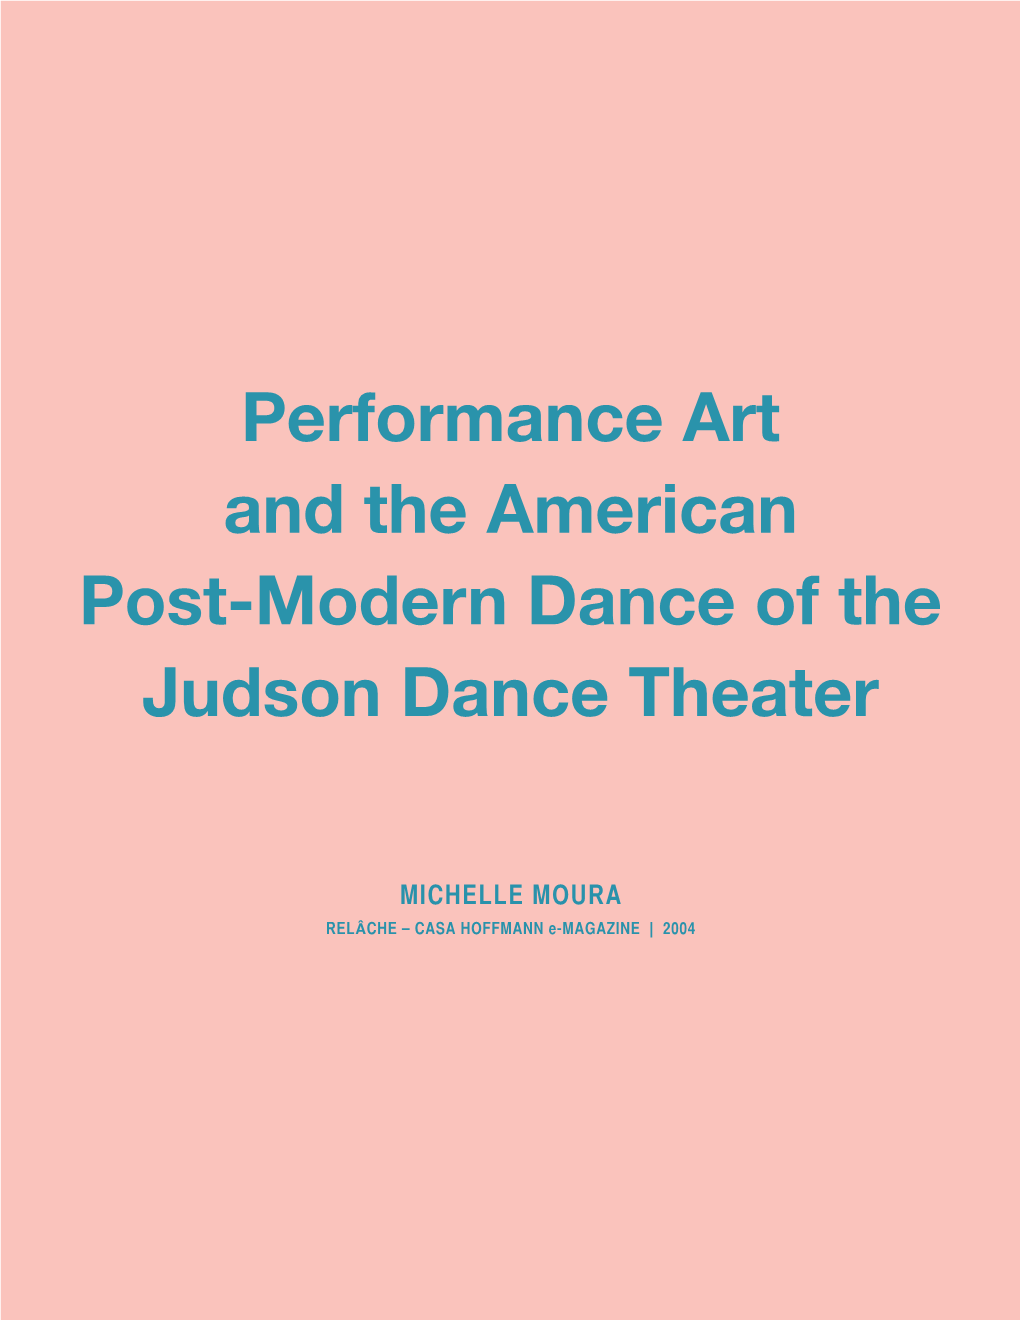 Performance Art and the American Post-Modern Dance of the Judson Dance Theater